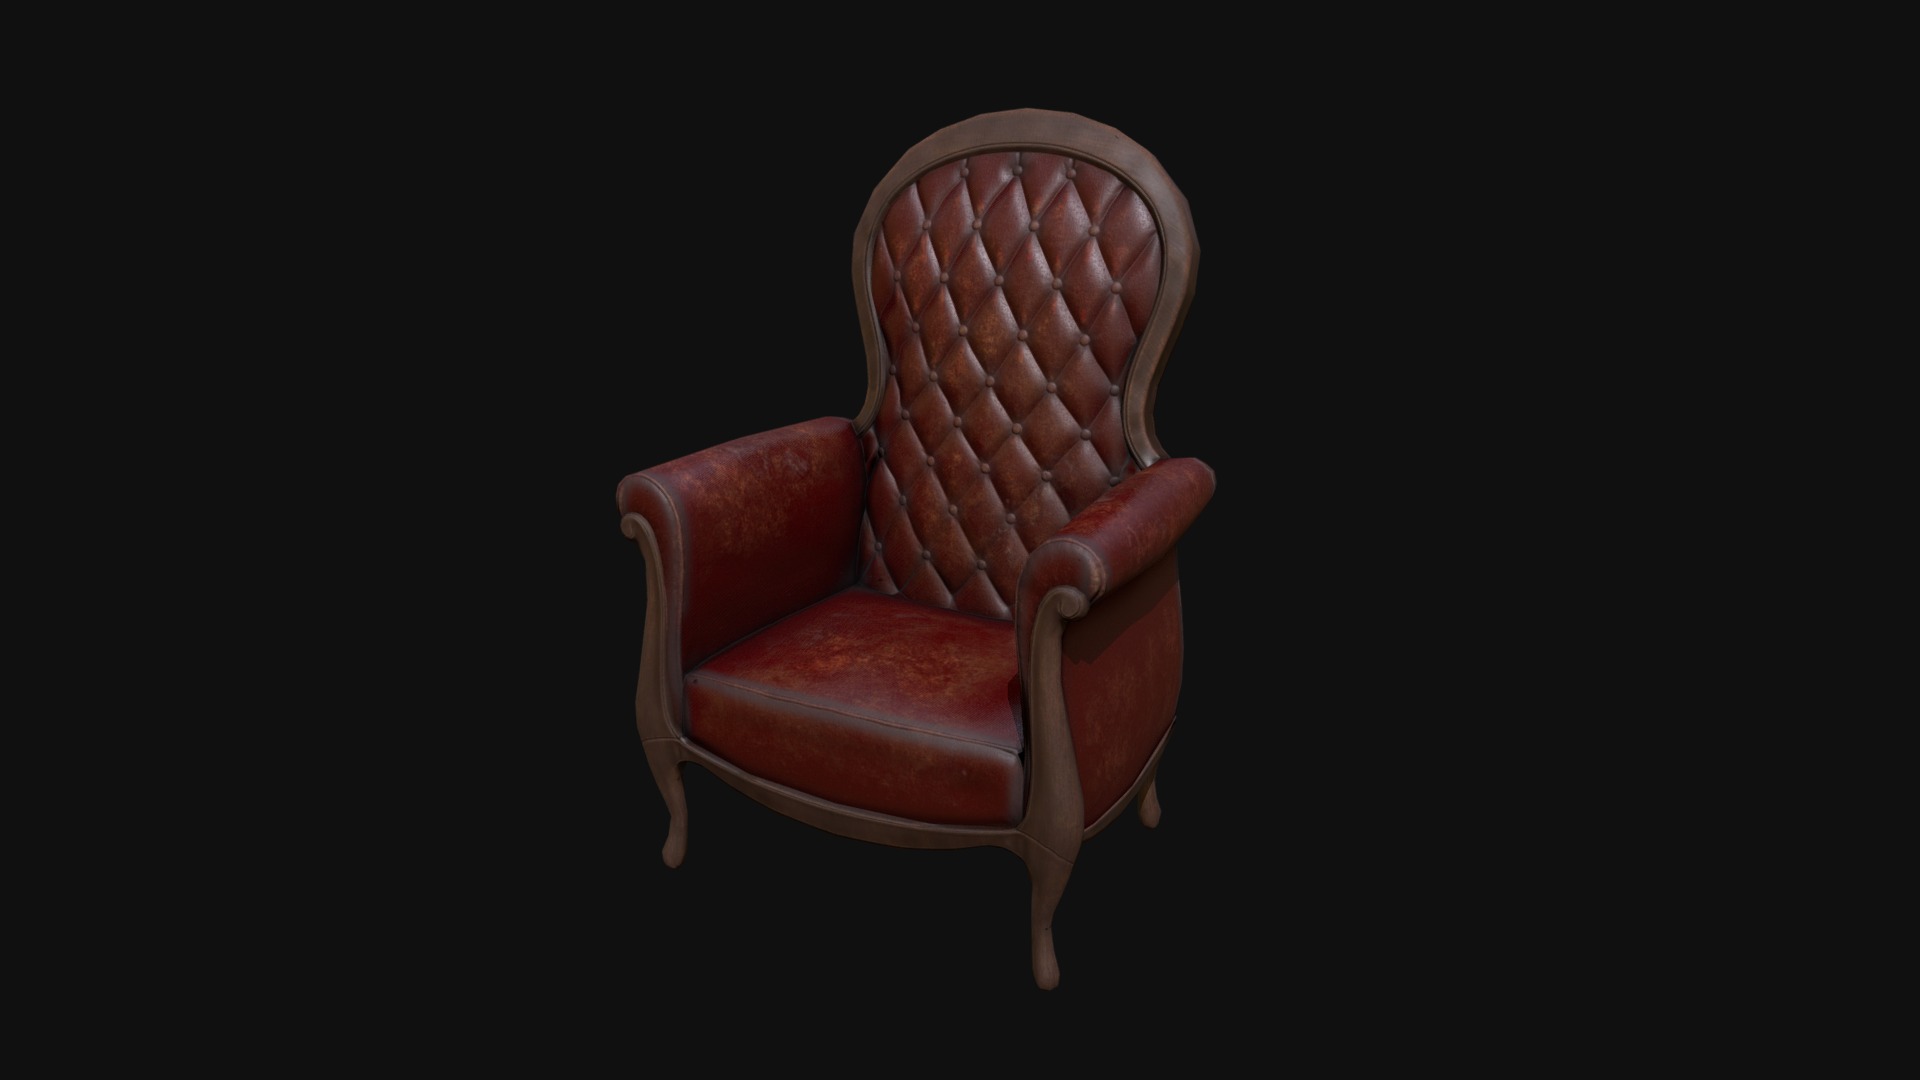 3D model Quilted leather chair - This is a 3D model of the Quilted leather chair. The 3D model is about a red leather chair.